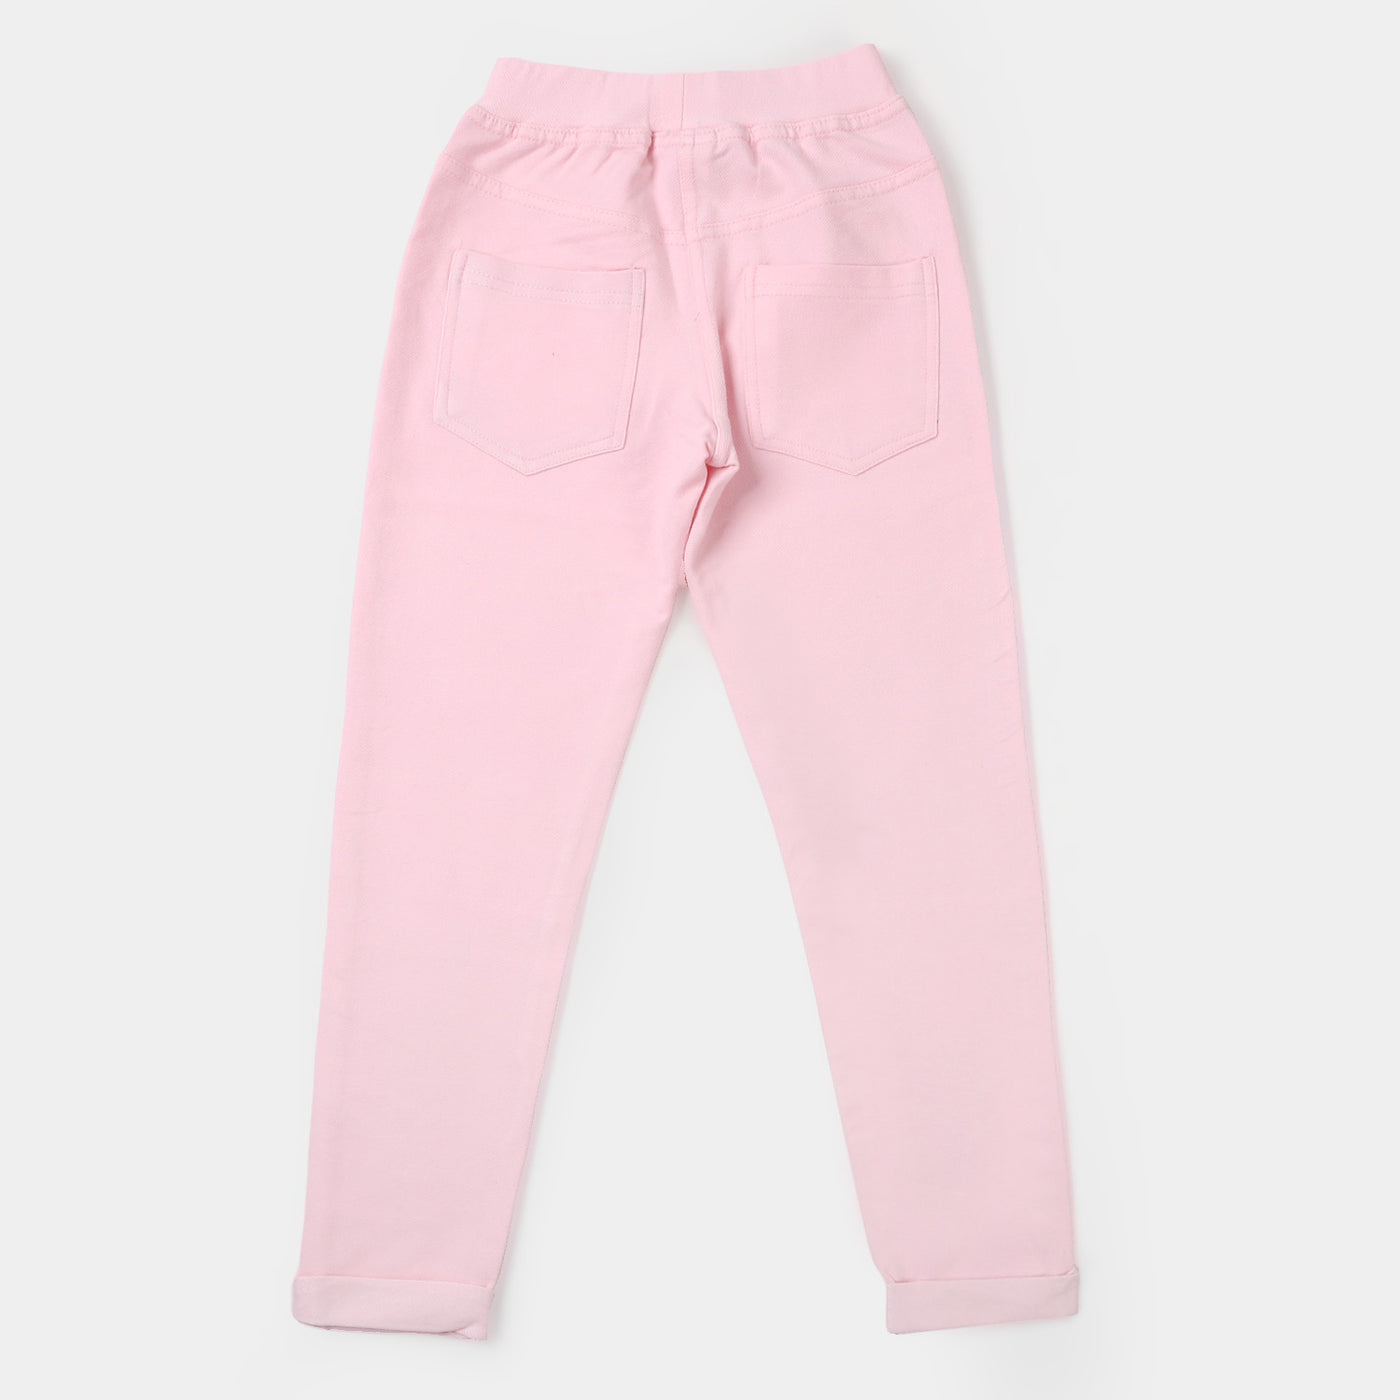 Girls Knitted Jeggings - Pink